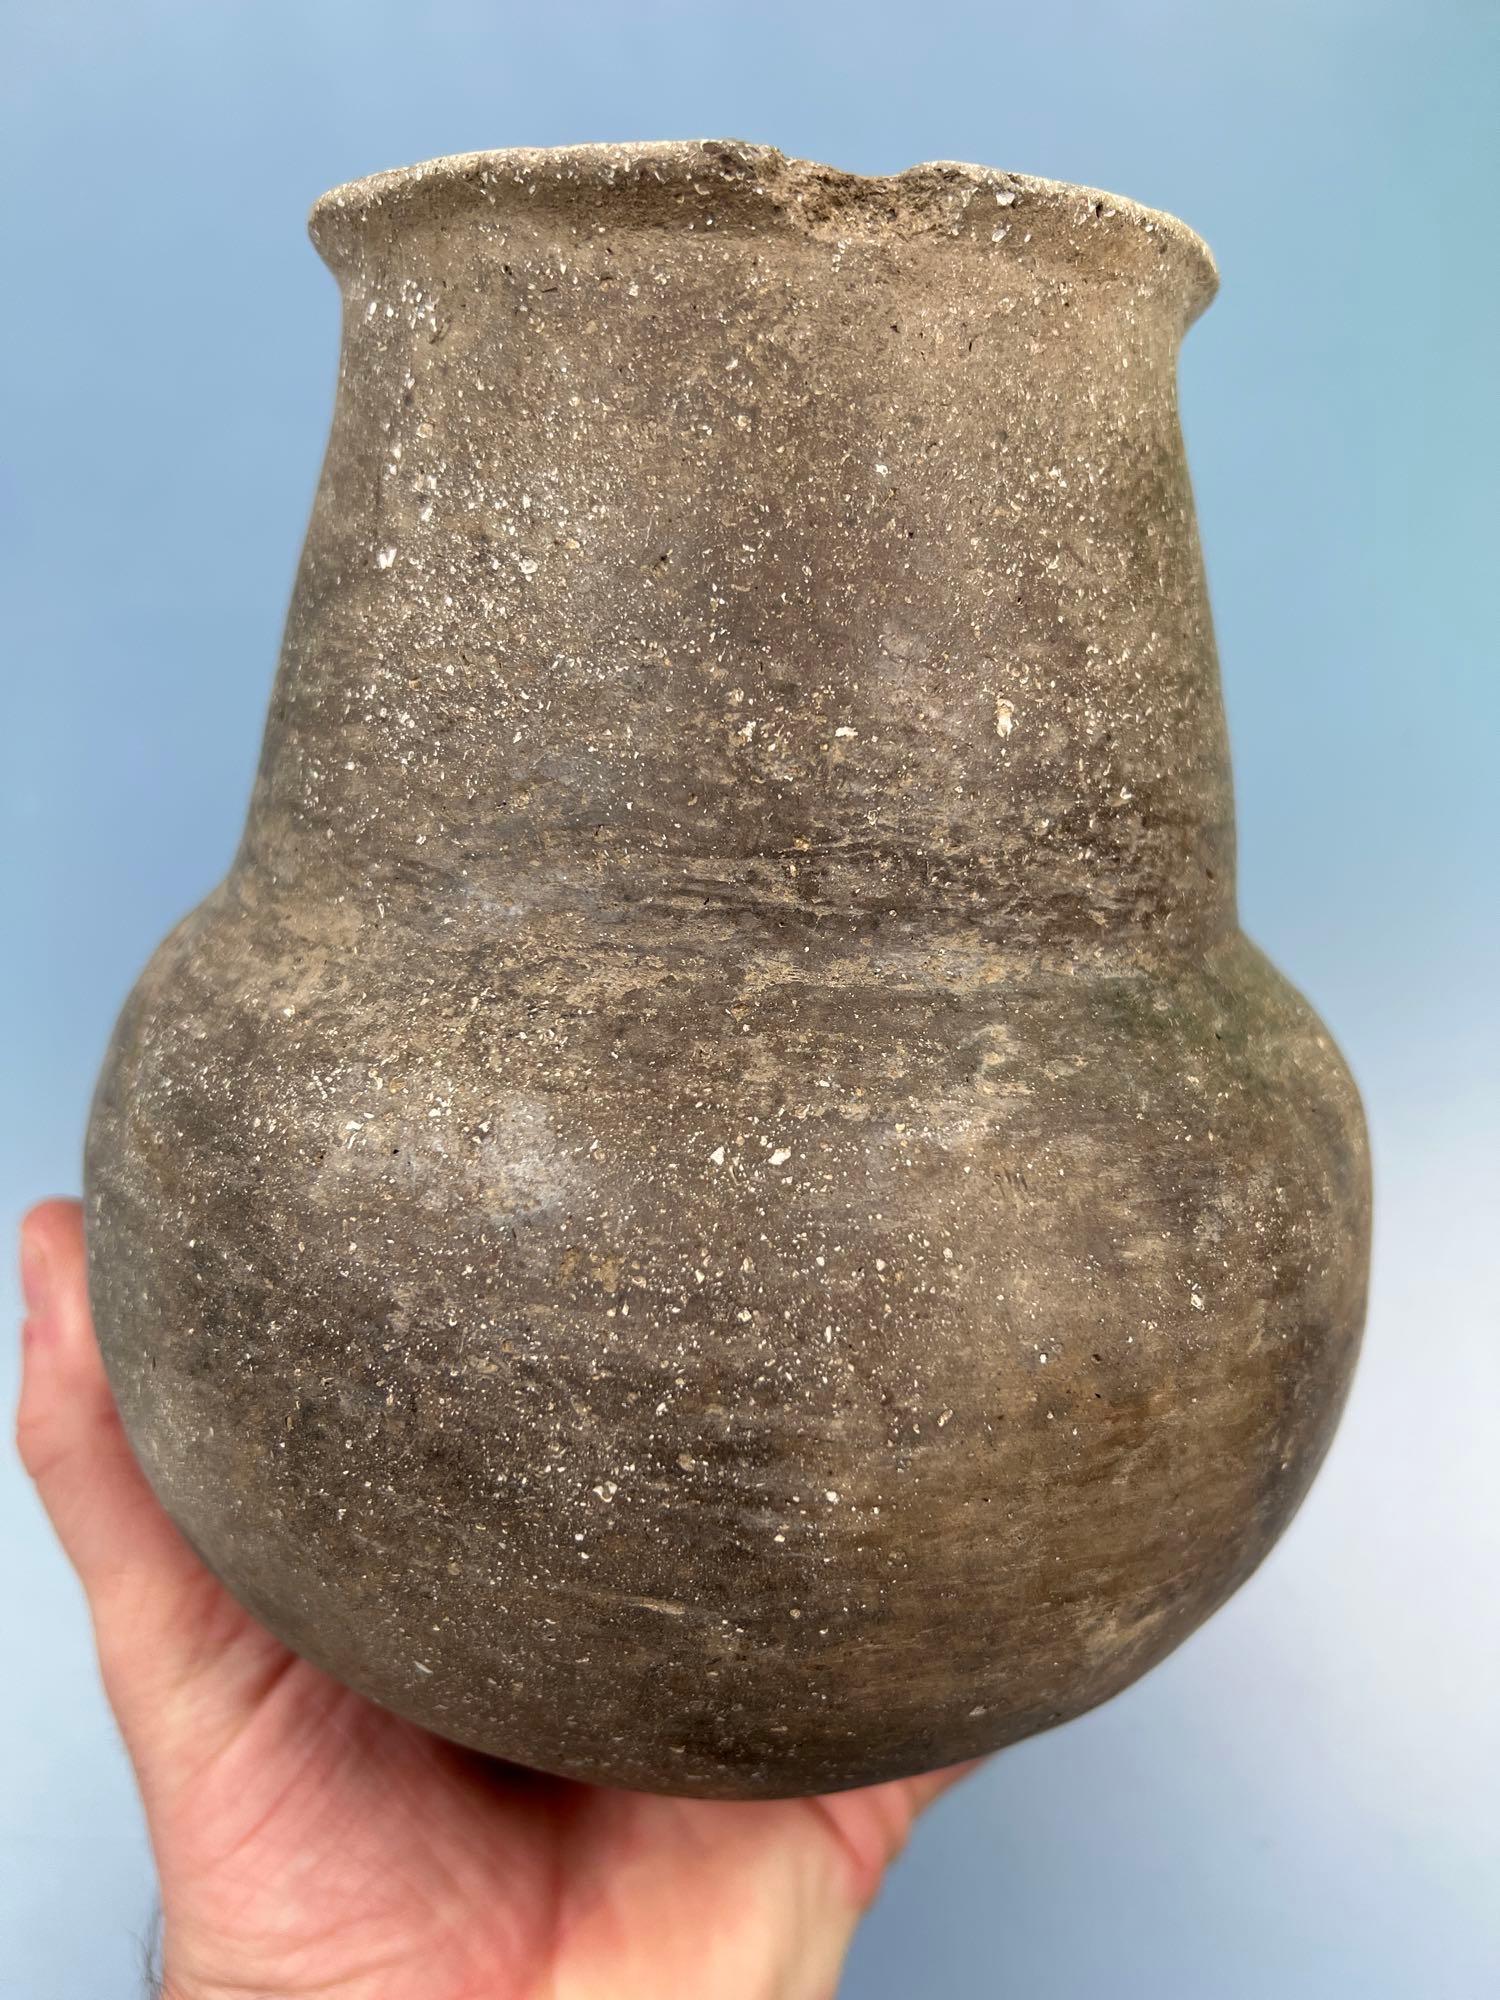 WIDE MOUTH Mississippian Jar/Bottle, 7" Tall, 3 1/2" Opening, Missouri, Great Condition, Small Stres